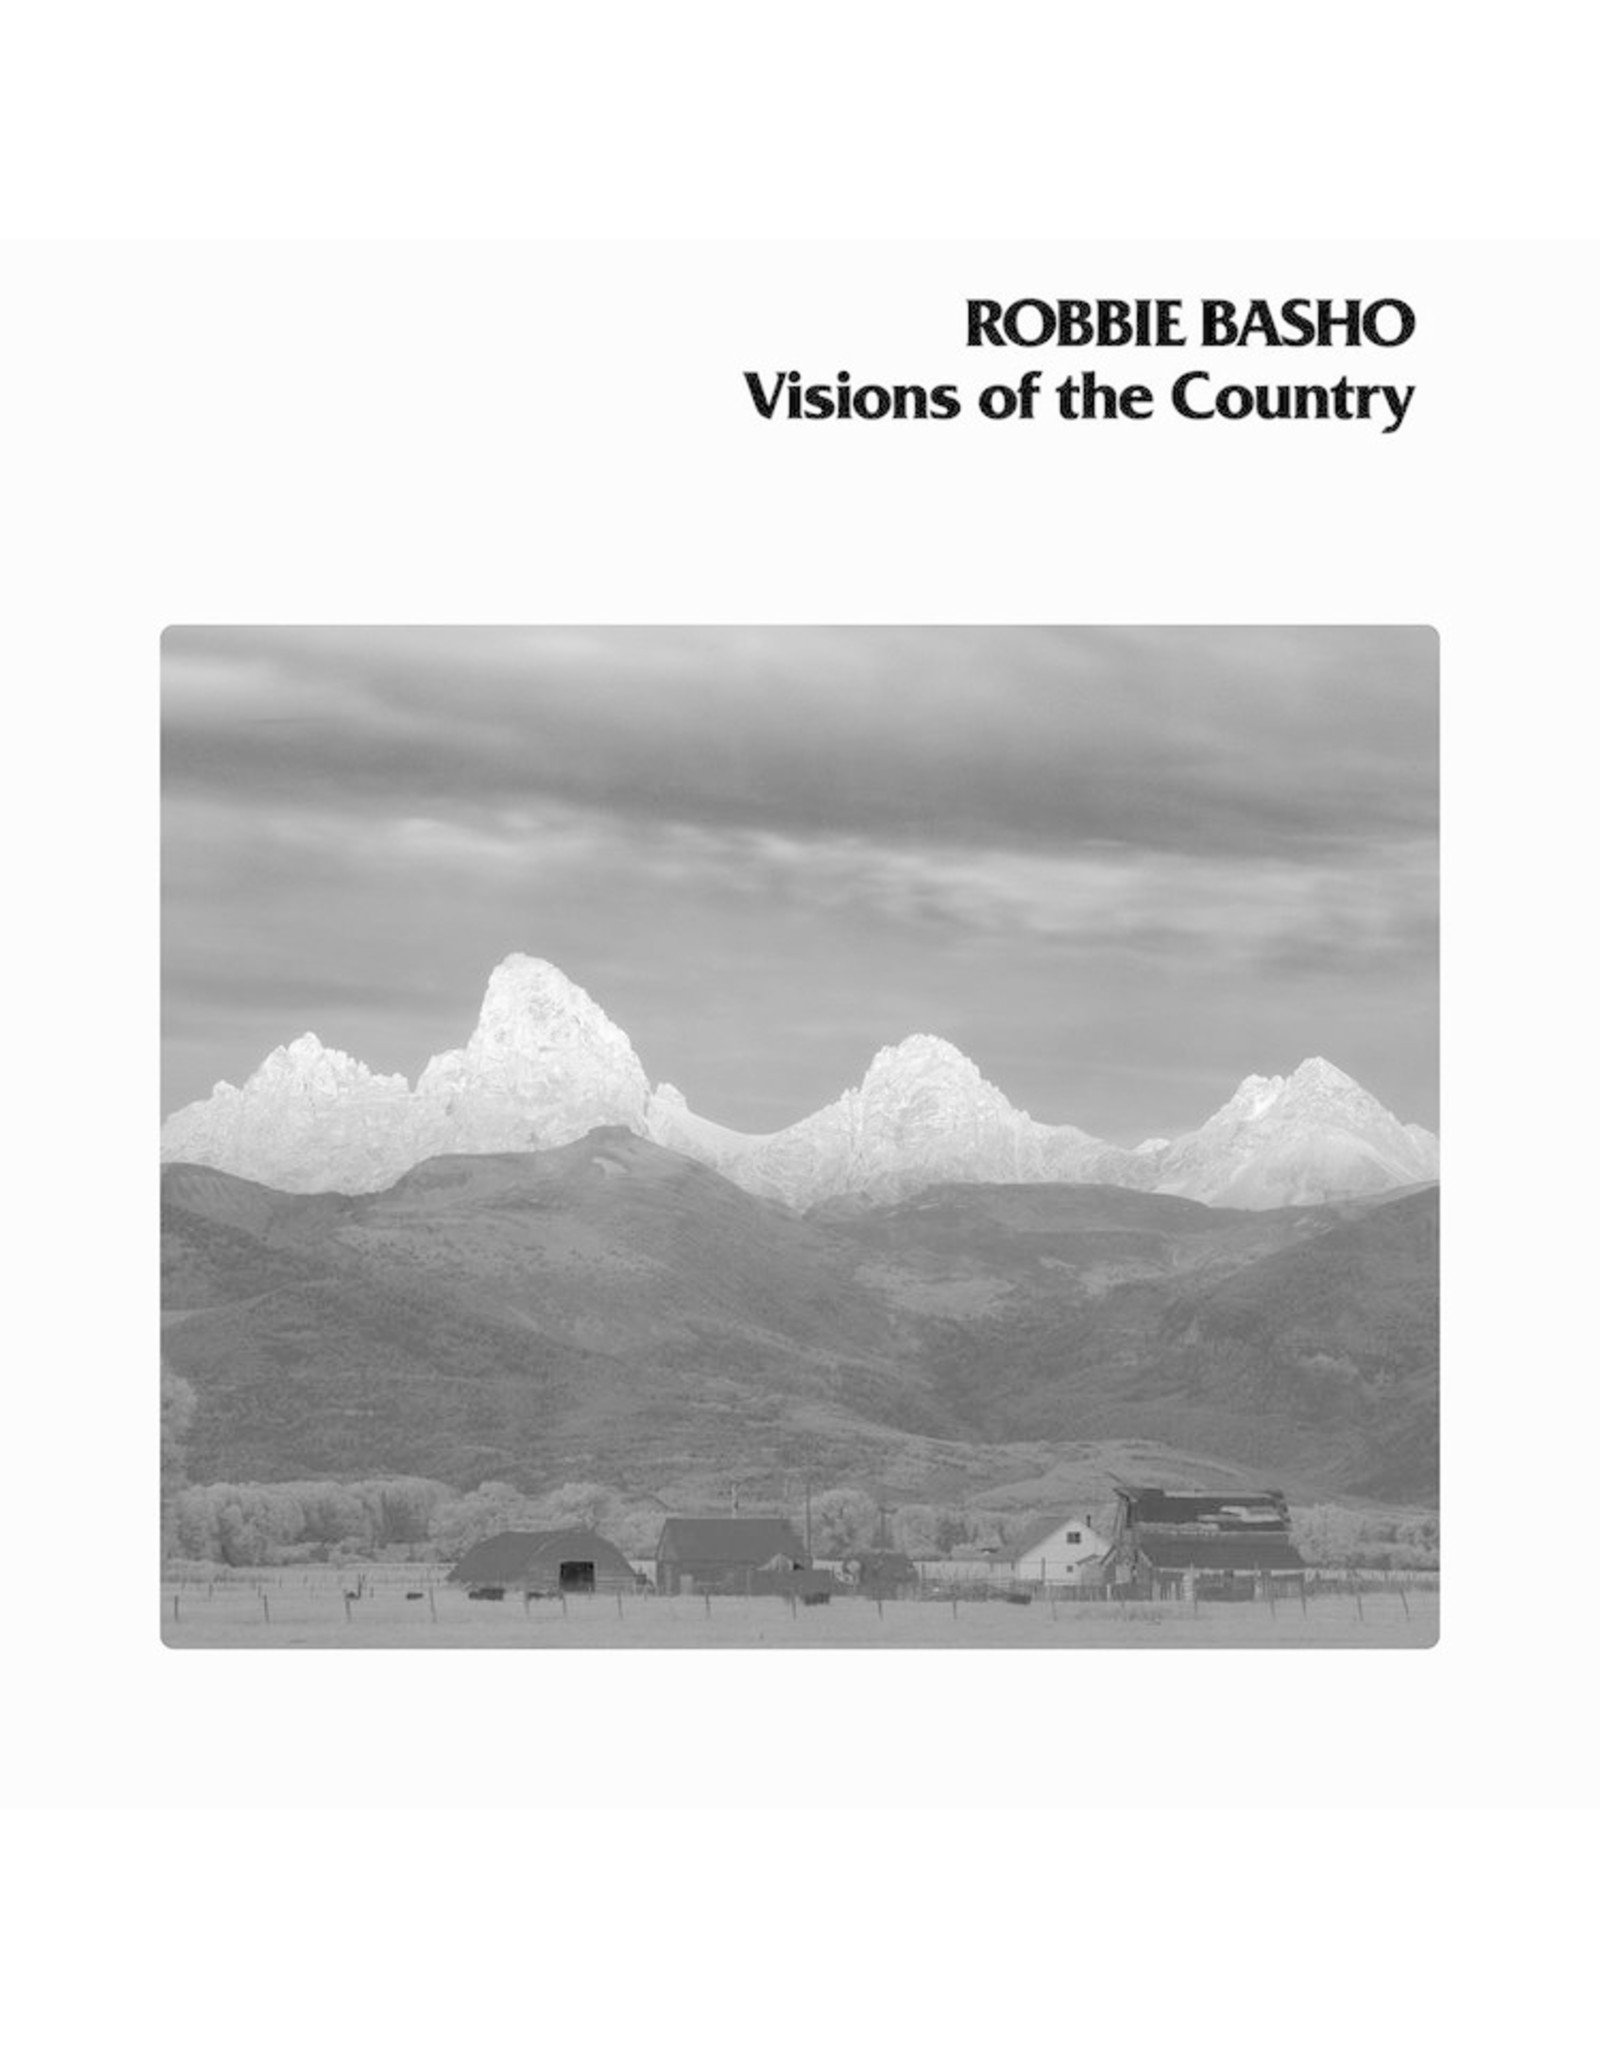 Gnome Life Basho, Robbie: Visions of the Country LP